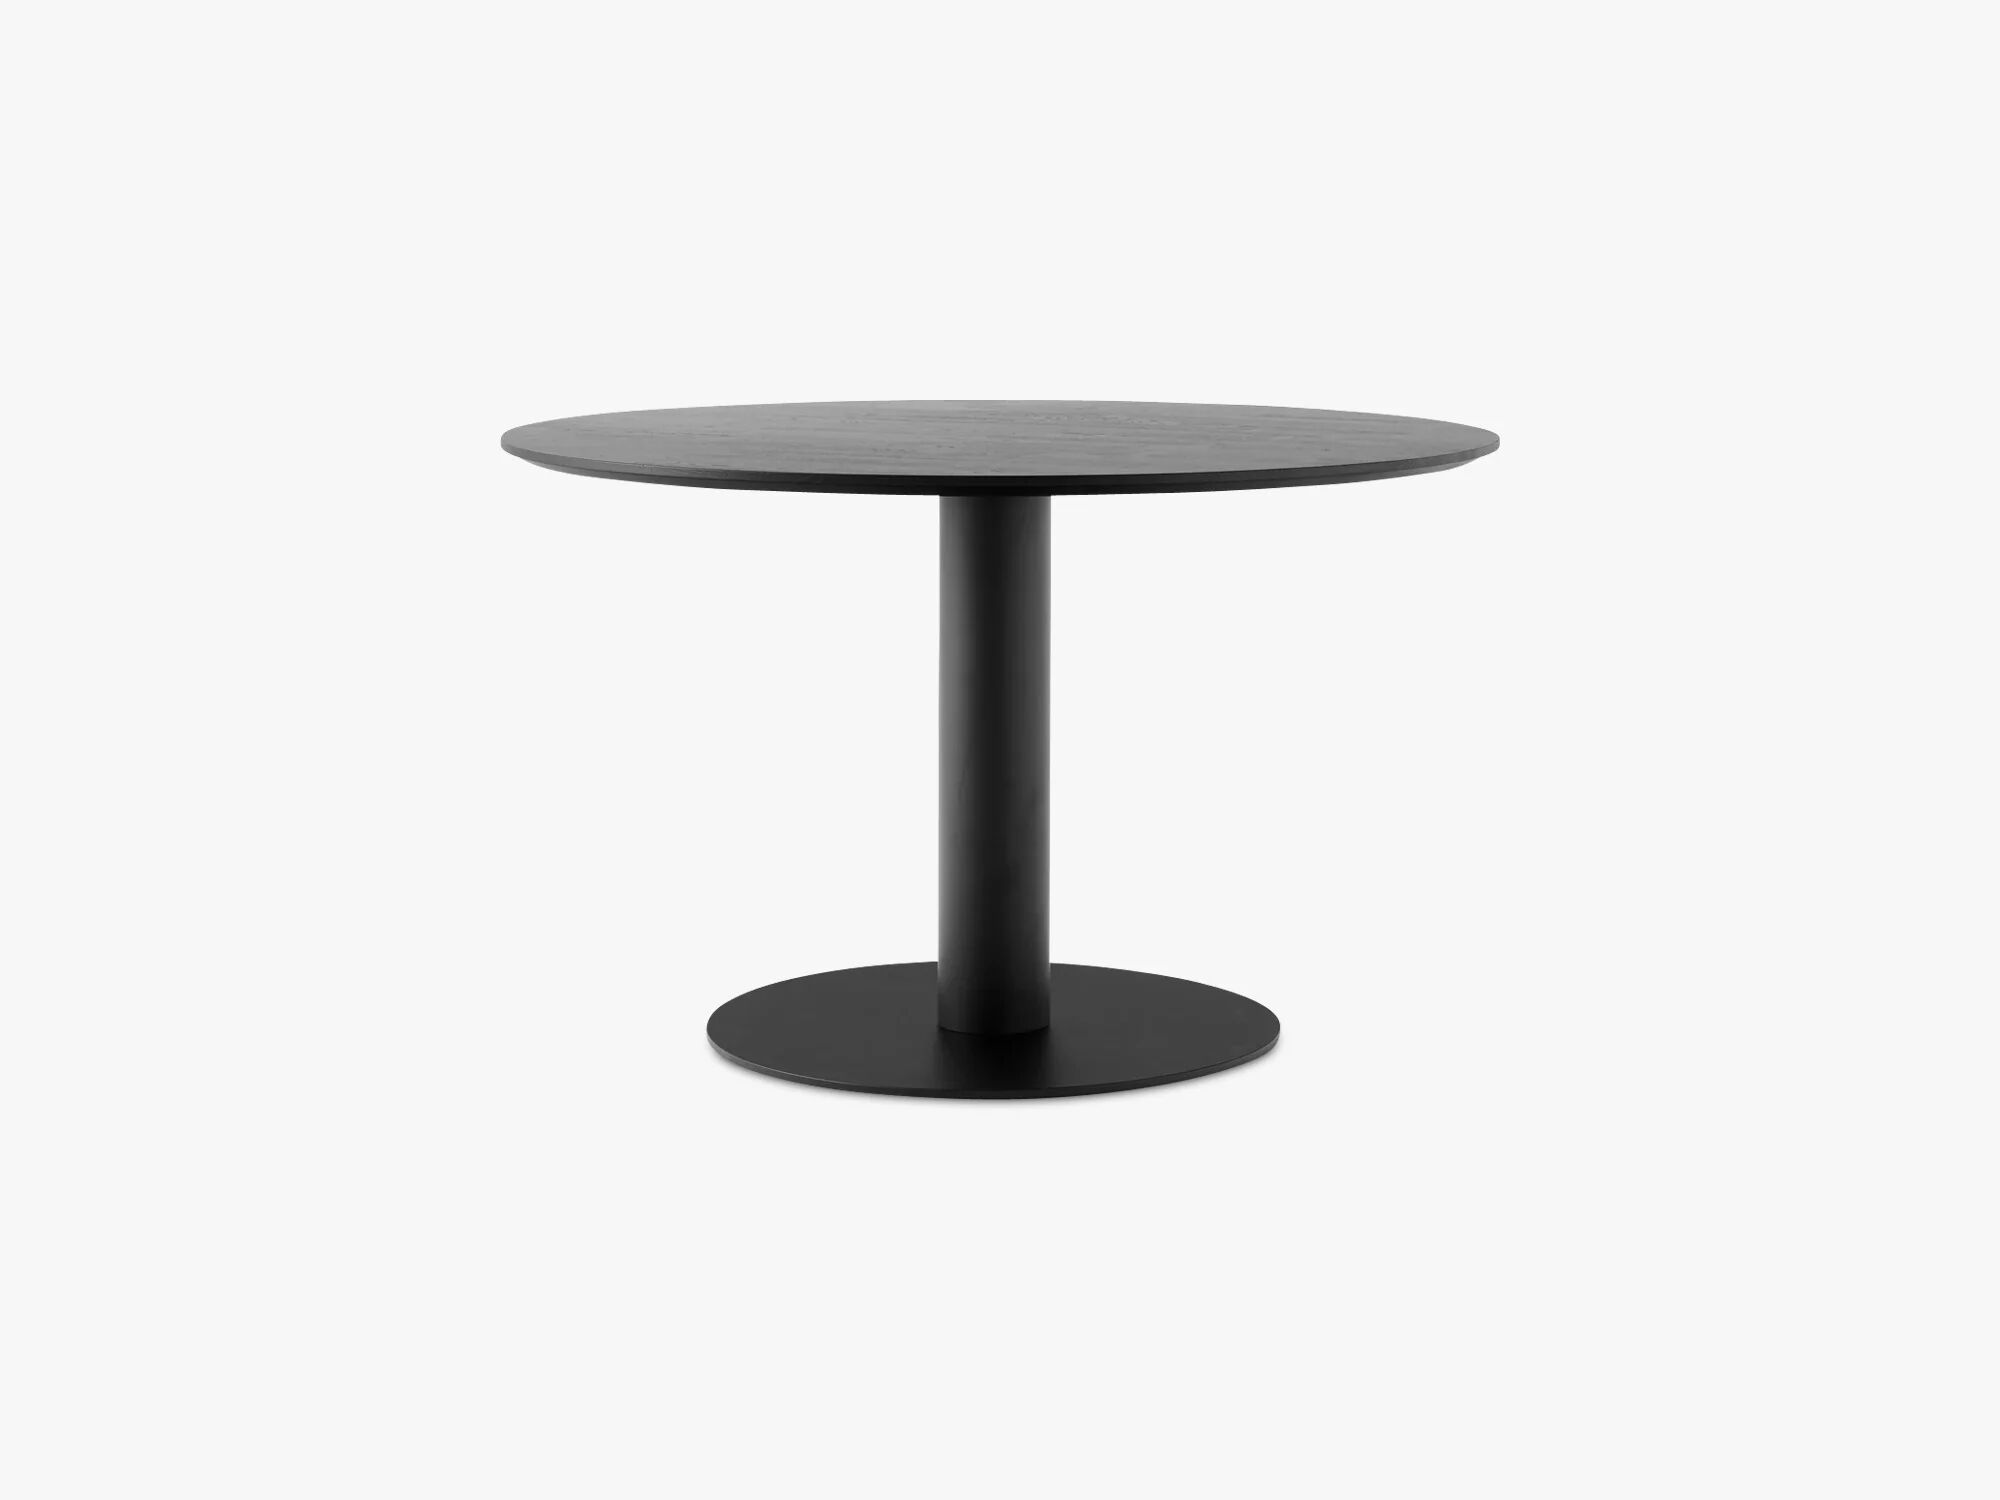 &tradition In Between table - SK12,Ø120